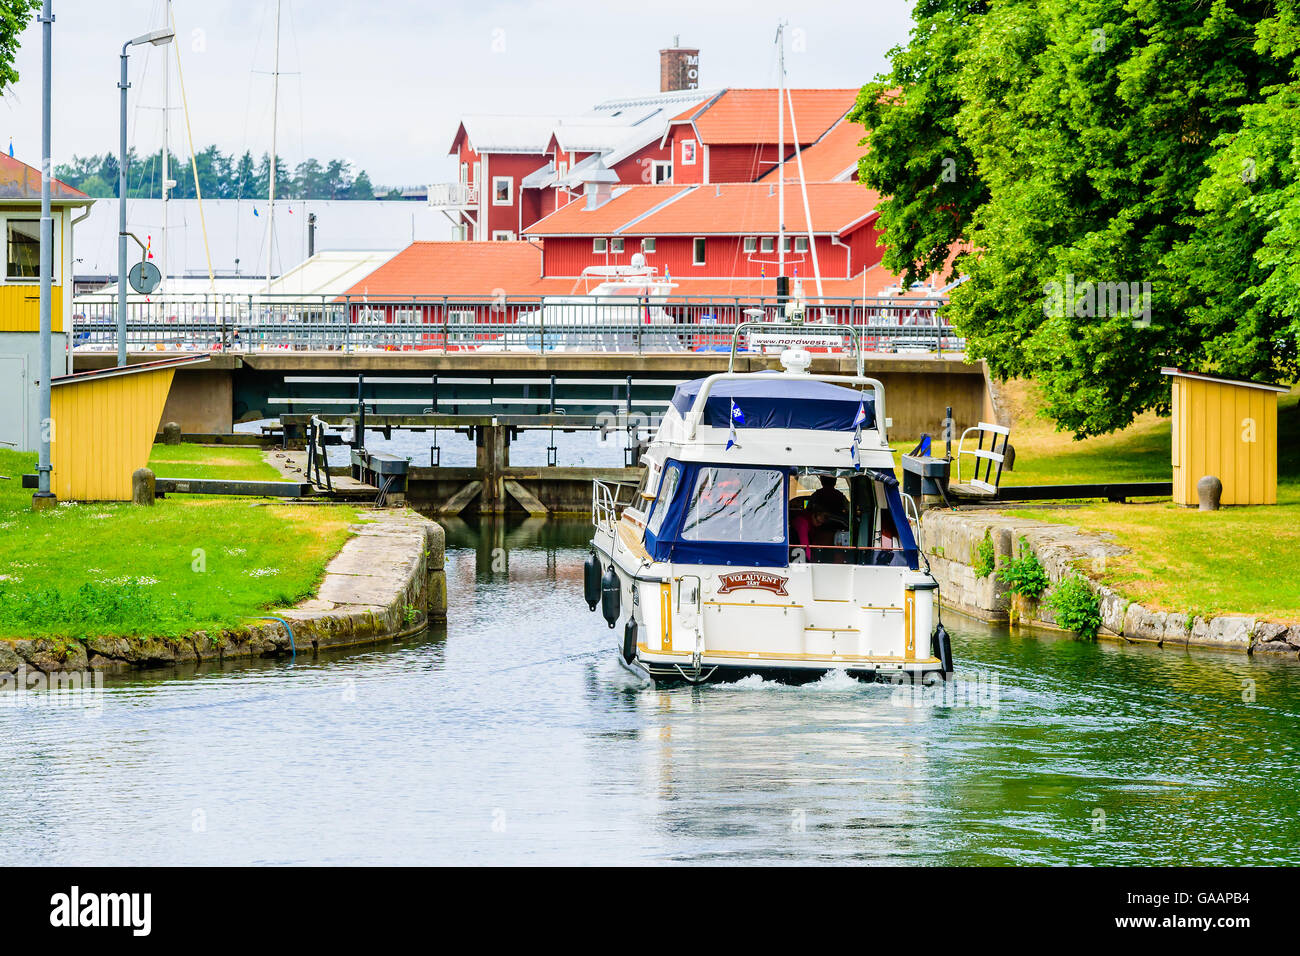 Motala, Sweden - June 21, 2016: Nord West 390 boat approaching canal lock at slow speed. Motala marina visible behind lock. Stock Photo